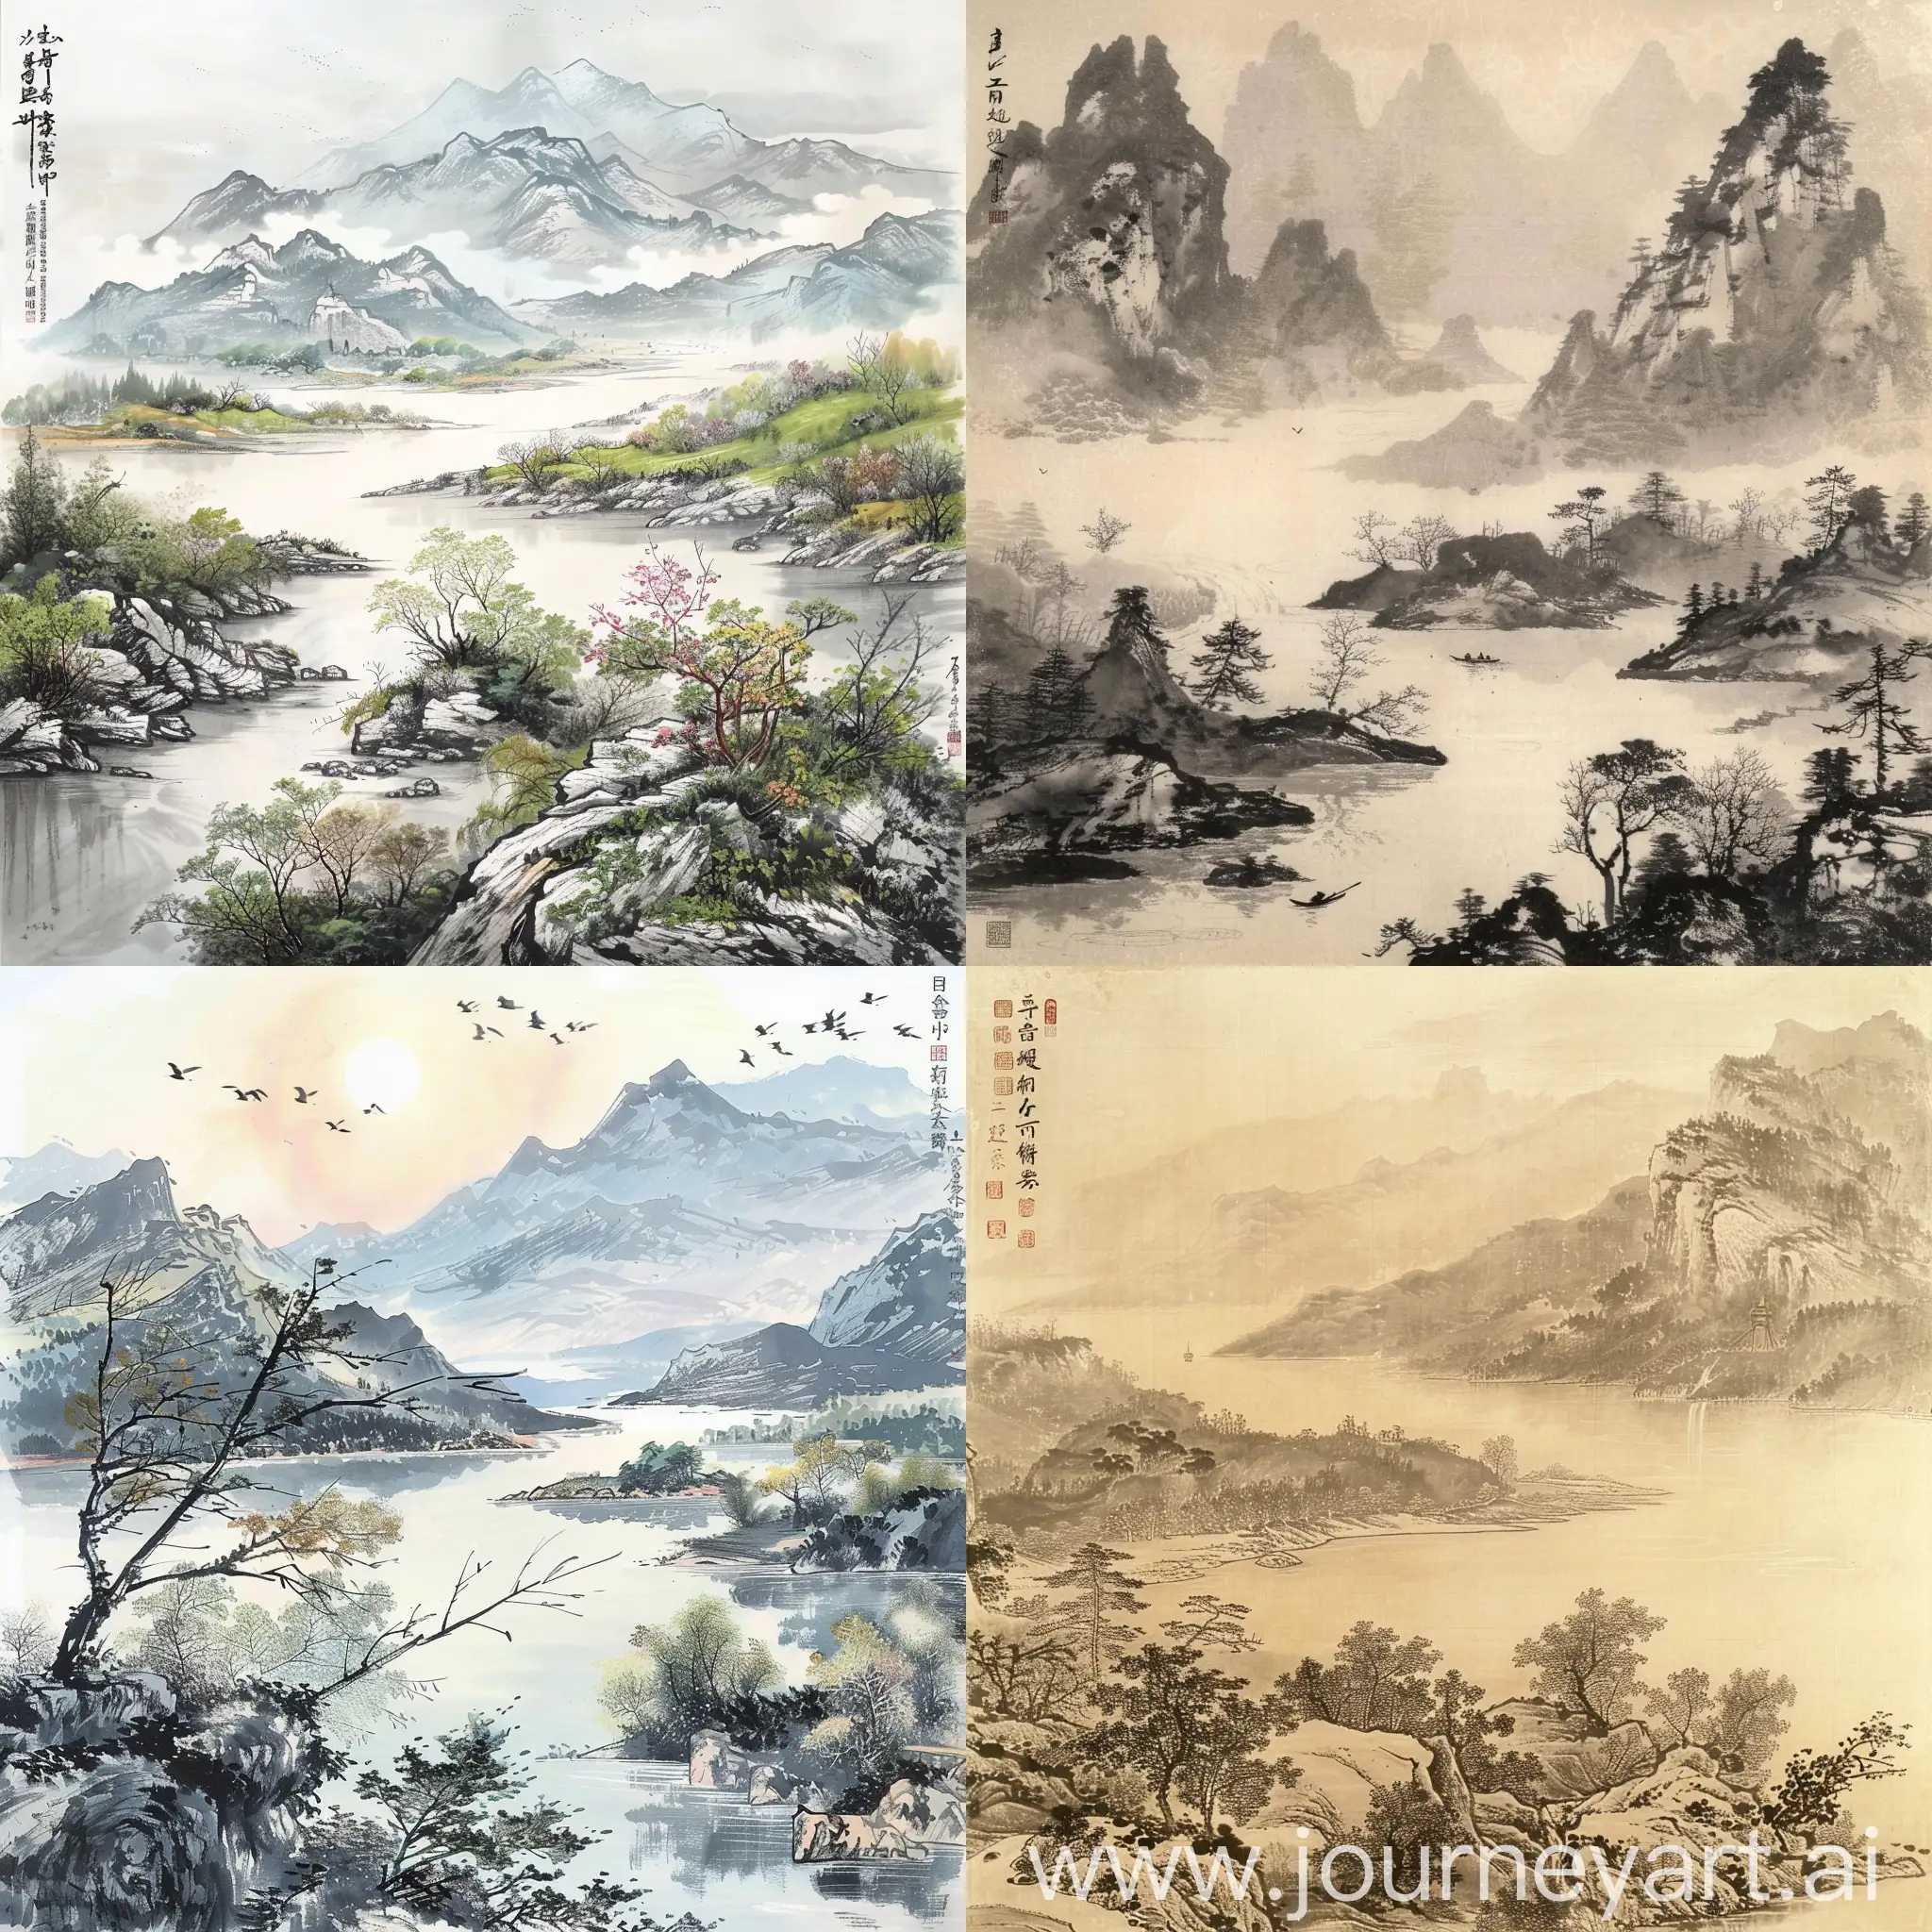 Traditional-Chinese-Ink-Painting-Serene-Mountains-Rivers-and-Lakes